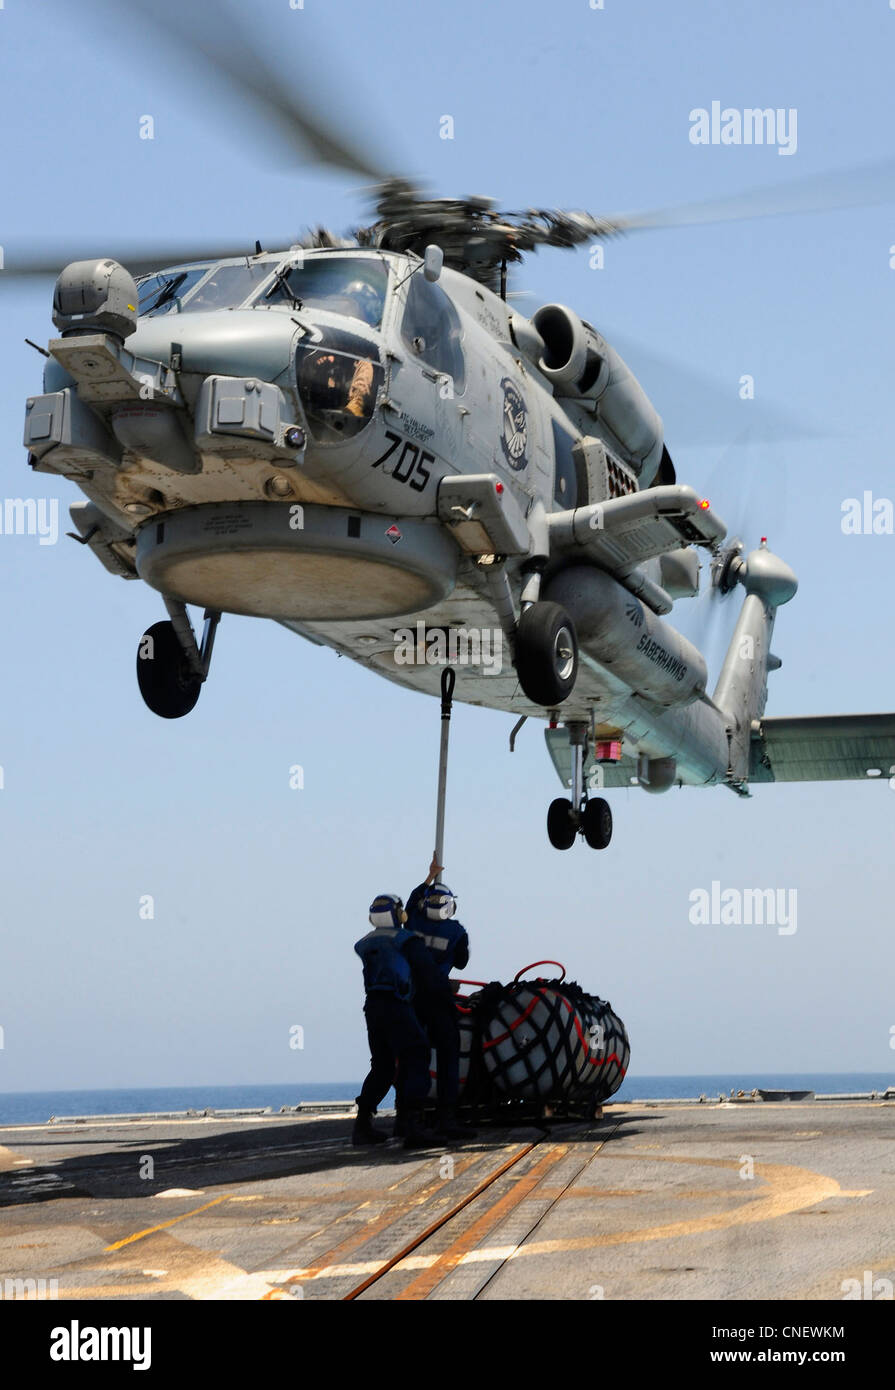 Sailors attach a cargo pallet to an MH-60R Sea Hawk helicopter assigned to the Saberhawks of Helicopter Maritime Strike Squadron 77 during replenishment at sea preparations aboard the Arleigh Burke-class guided-missile destroyer USS Sterett (DDG 104). Sterett is deployed as part of the Abraham Lincoln Carrier Strike Group to the U.S. 5th Fleet area of responsibility conducting maritime security operations, theater security cooperation efforts and support missions as part of Operation Enduring Freedom. ( Stock Photo